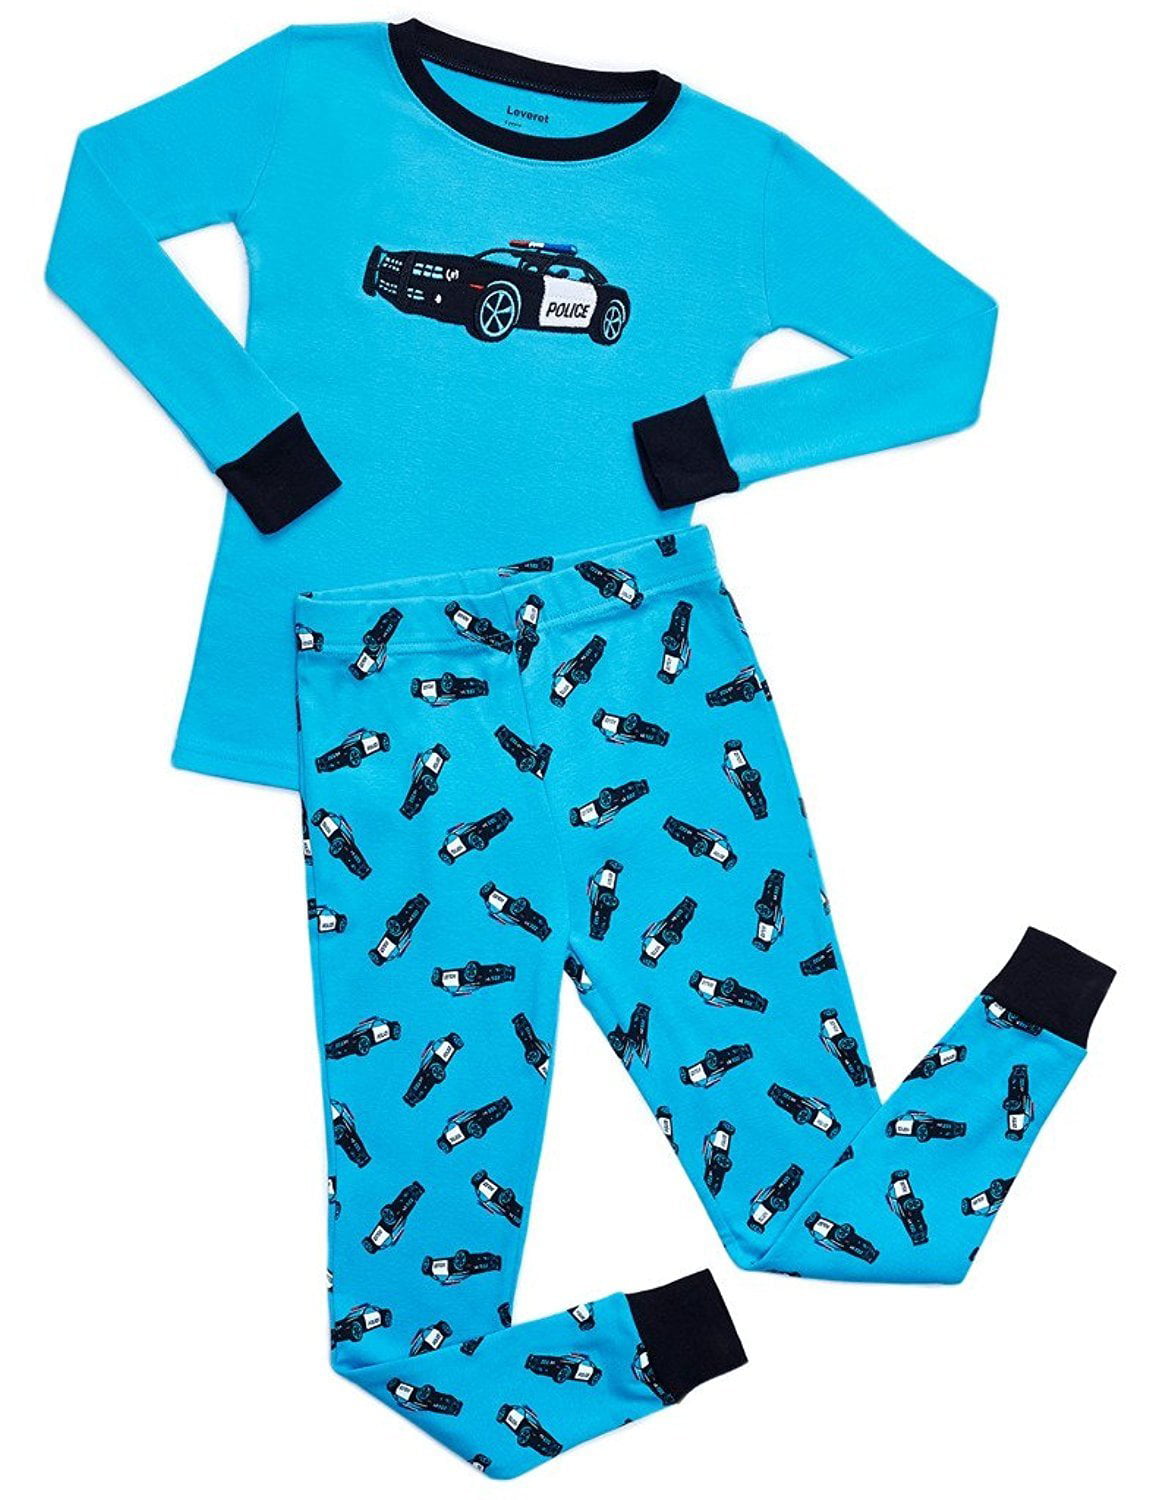 Leveret Kids & Toddler Pajamas Boys Girls 2 Piece PJs 100% Cotton Variety of Styles Size 12 Months-14 Years